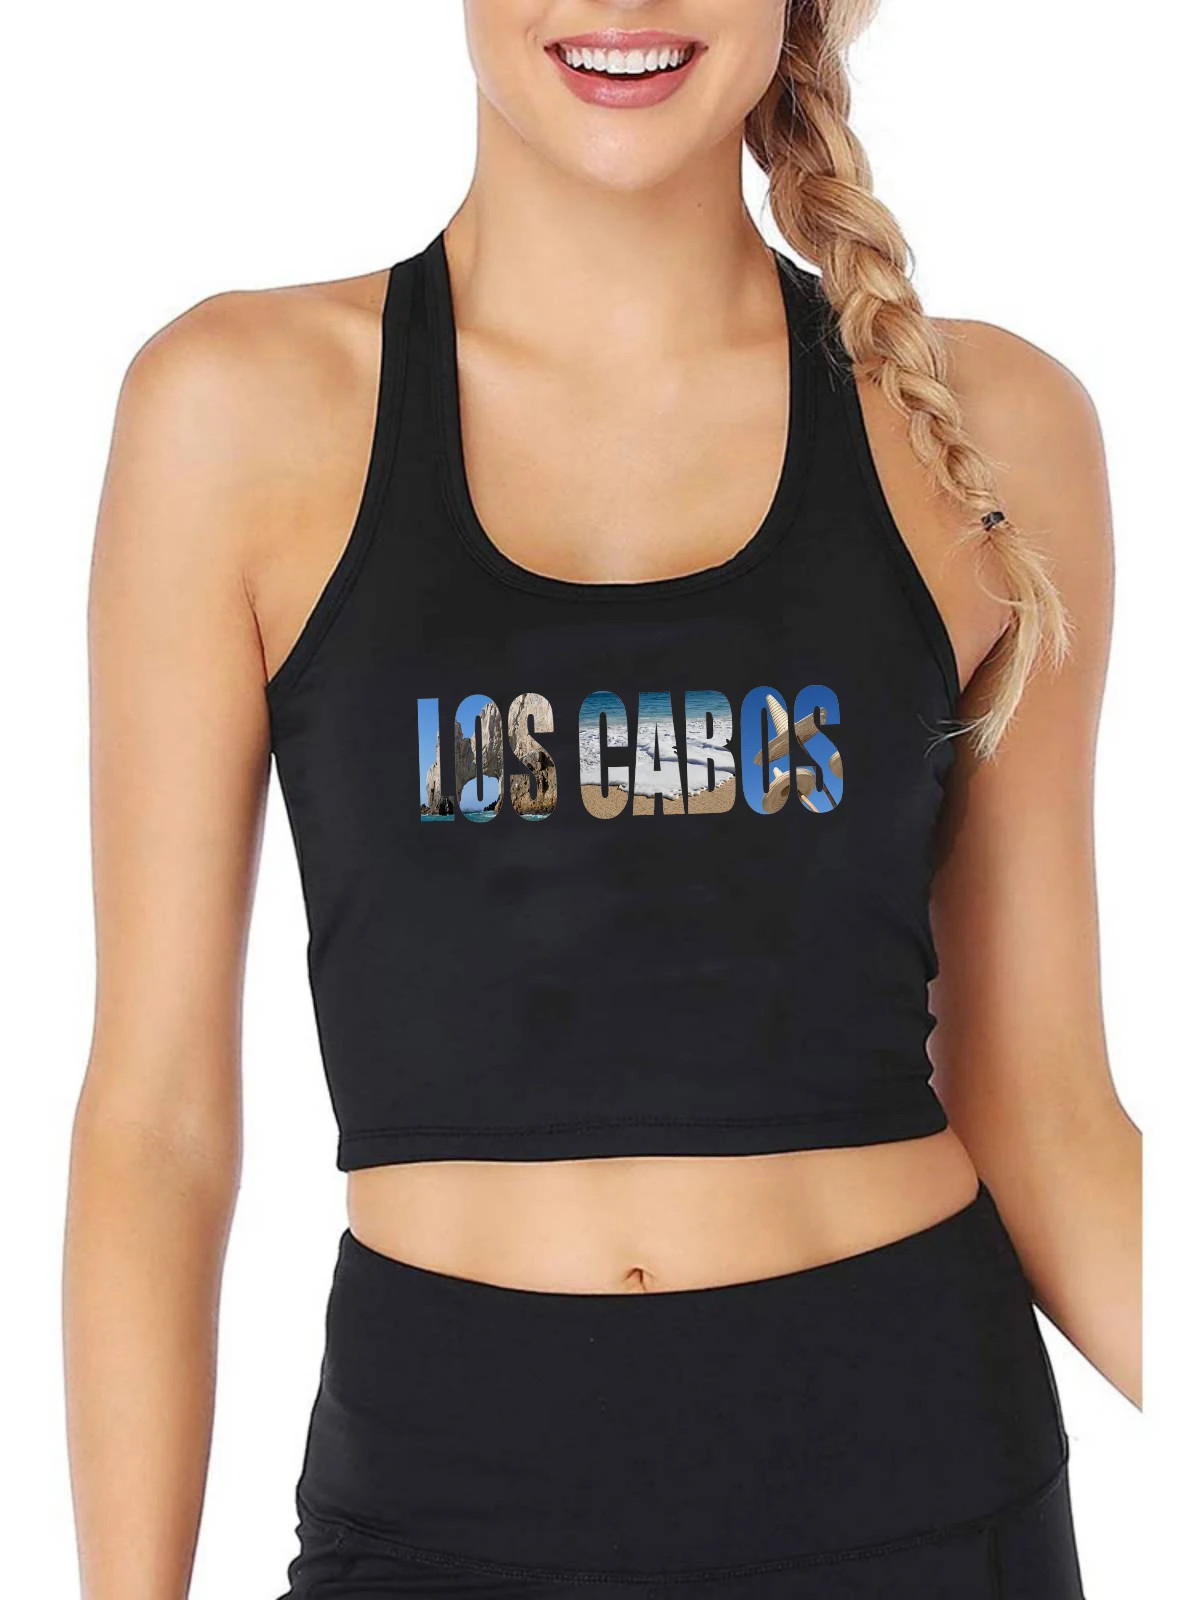 

Los Cabos Tourism Scenery Art Design Sexy Slim Fit Crop Top Girl's Attraction Commemorative Tank Tops Street Fashion Camisole